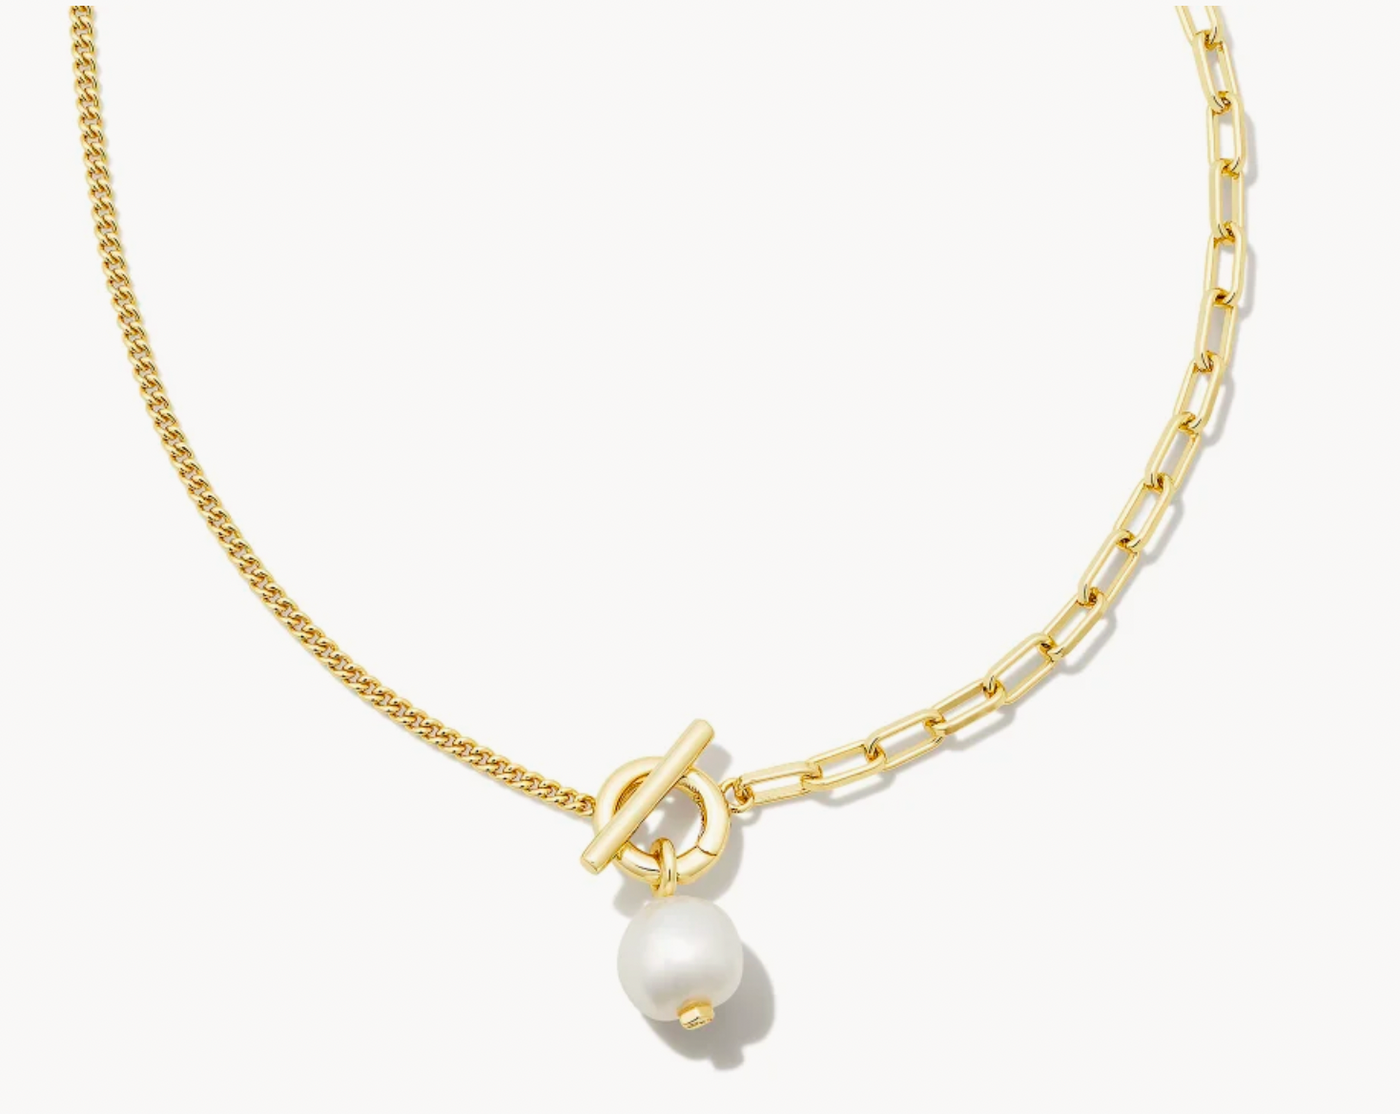 Kendra Scott Leighton Convertible Gold Pearl Chain Necklace in White Pearl